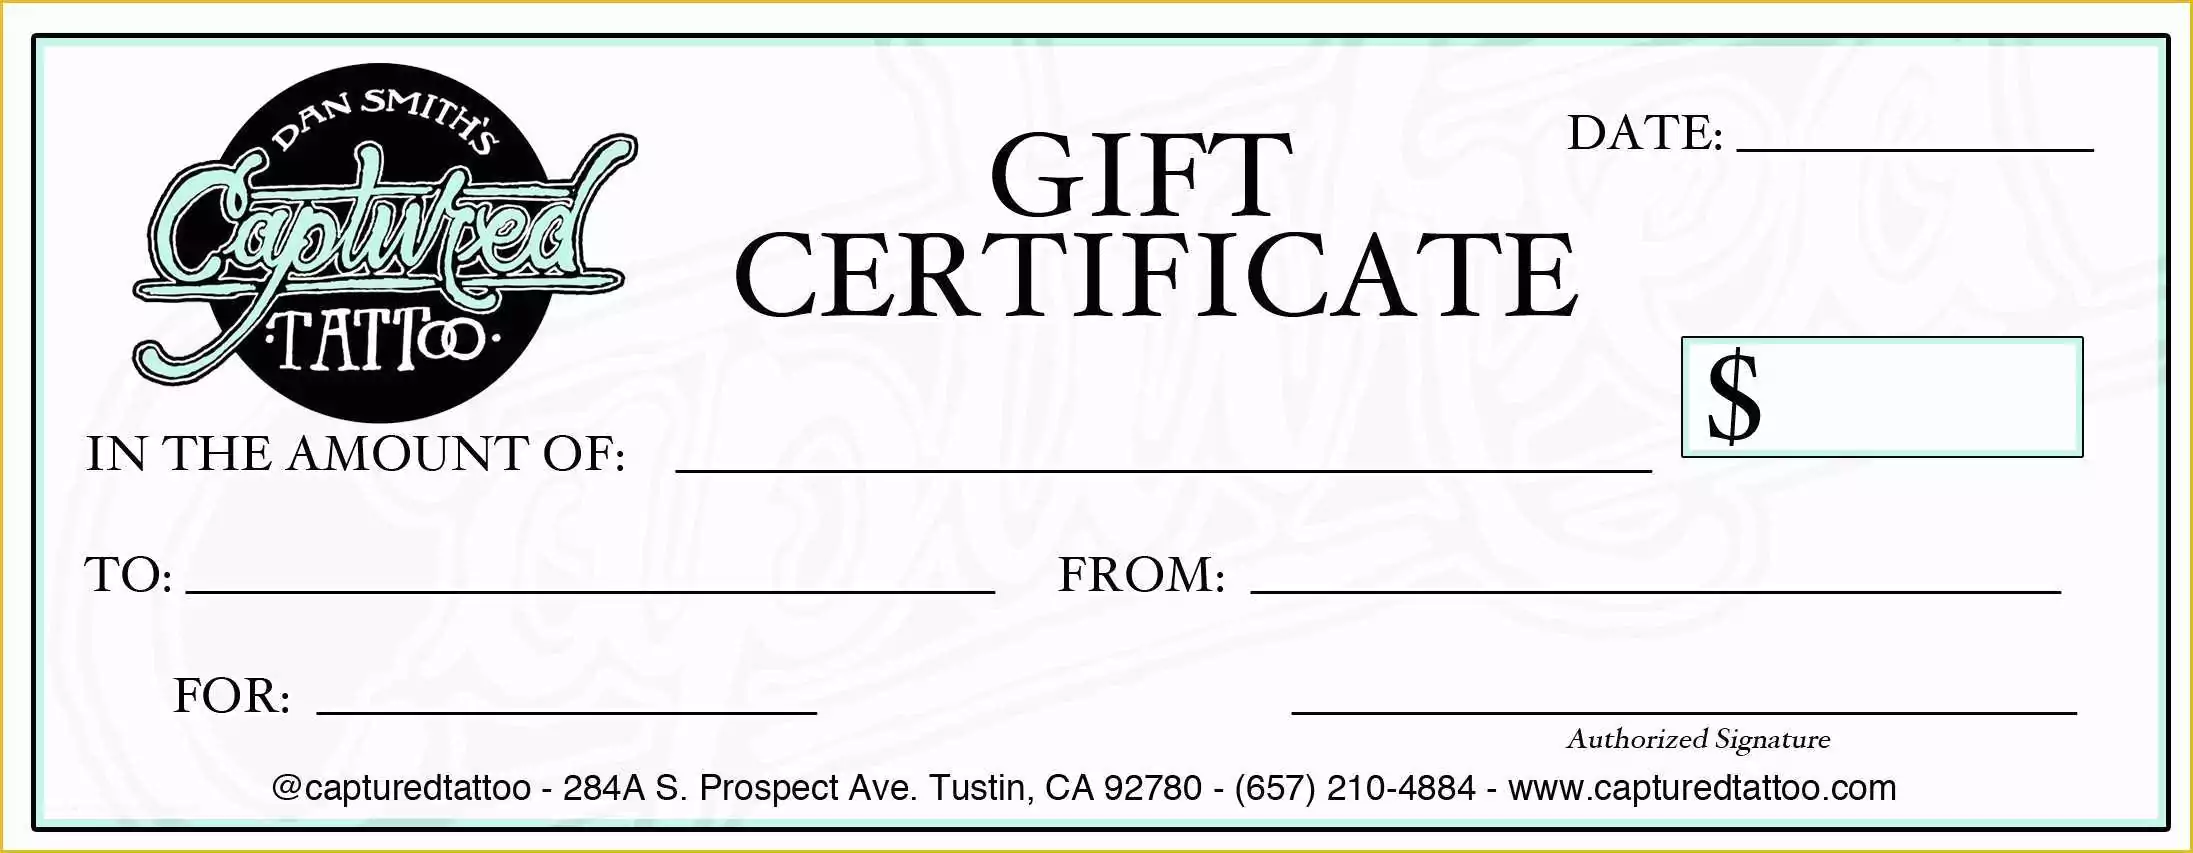 Restaurant Gift Certificate Template Free Download Of Captured Tattoo — Captured Gift Certificate $250